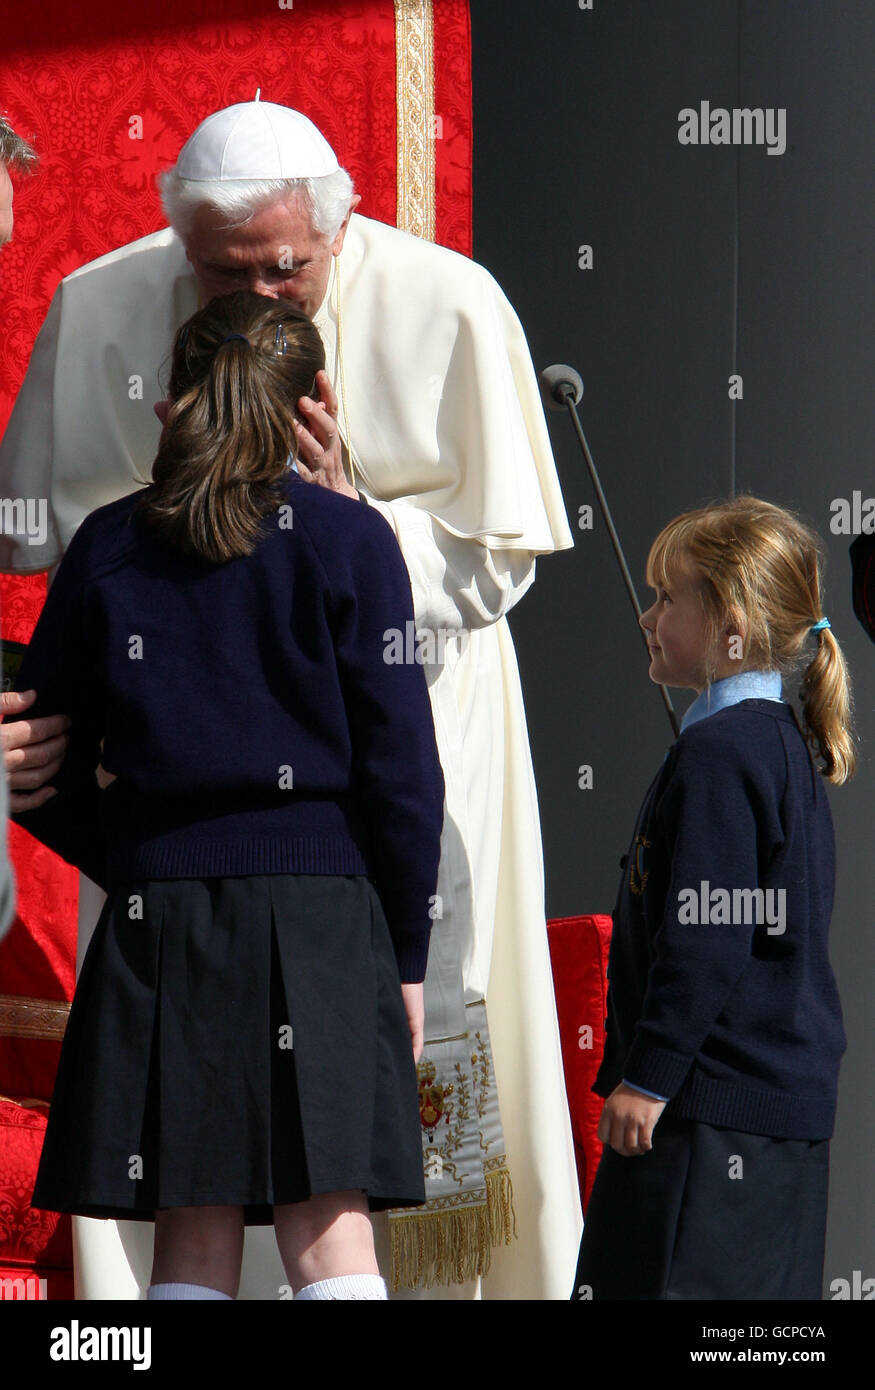 Children from the Holy Cross Primary School in Plymouth on stage with Pope Benedict XVI during The Big Assembly a celebration of Catholic education at St Mary's University College, Twickenham, in SW London. PRESS ASSOCIATION Photo. Picture date: Friday September 17, 2010. The pope is on a four day visit to the United Kingdom. See PA story RELIGION Pope. Photo credit should read: Steve Parsons/PA Wire Stock Photo